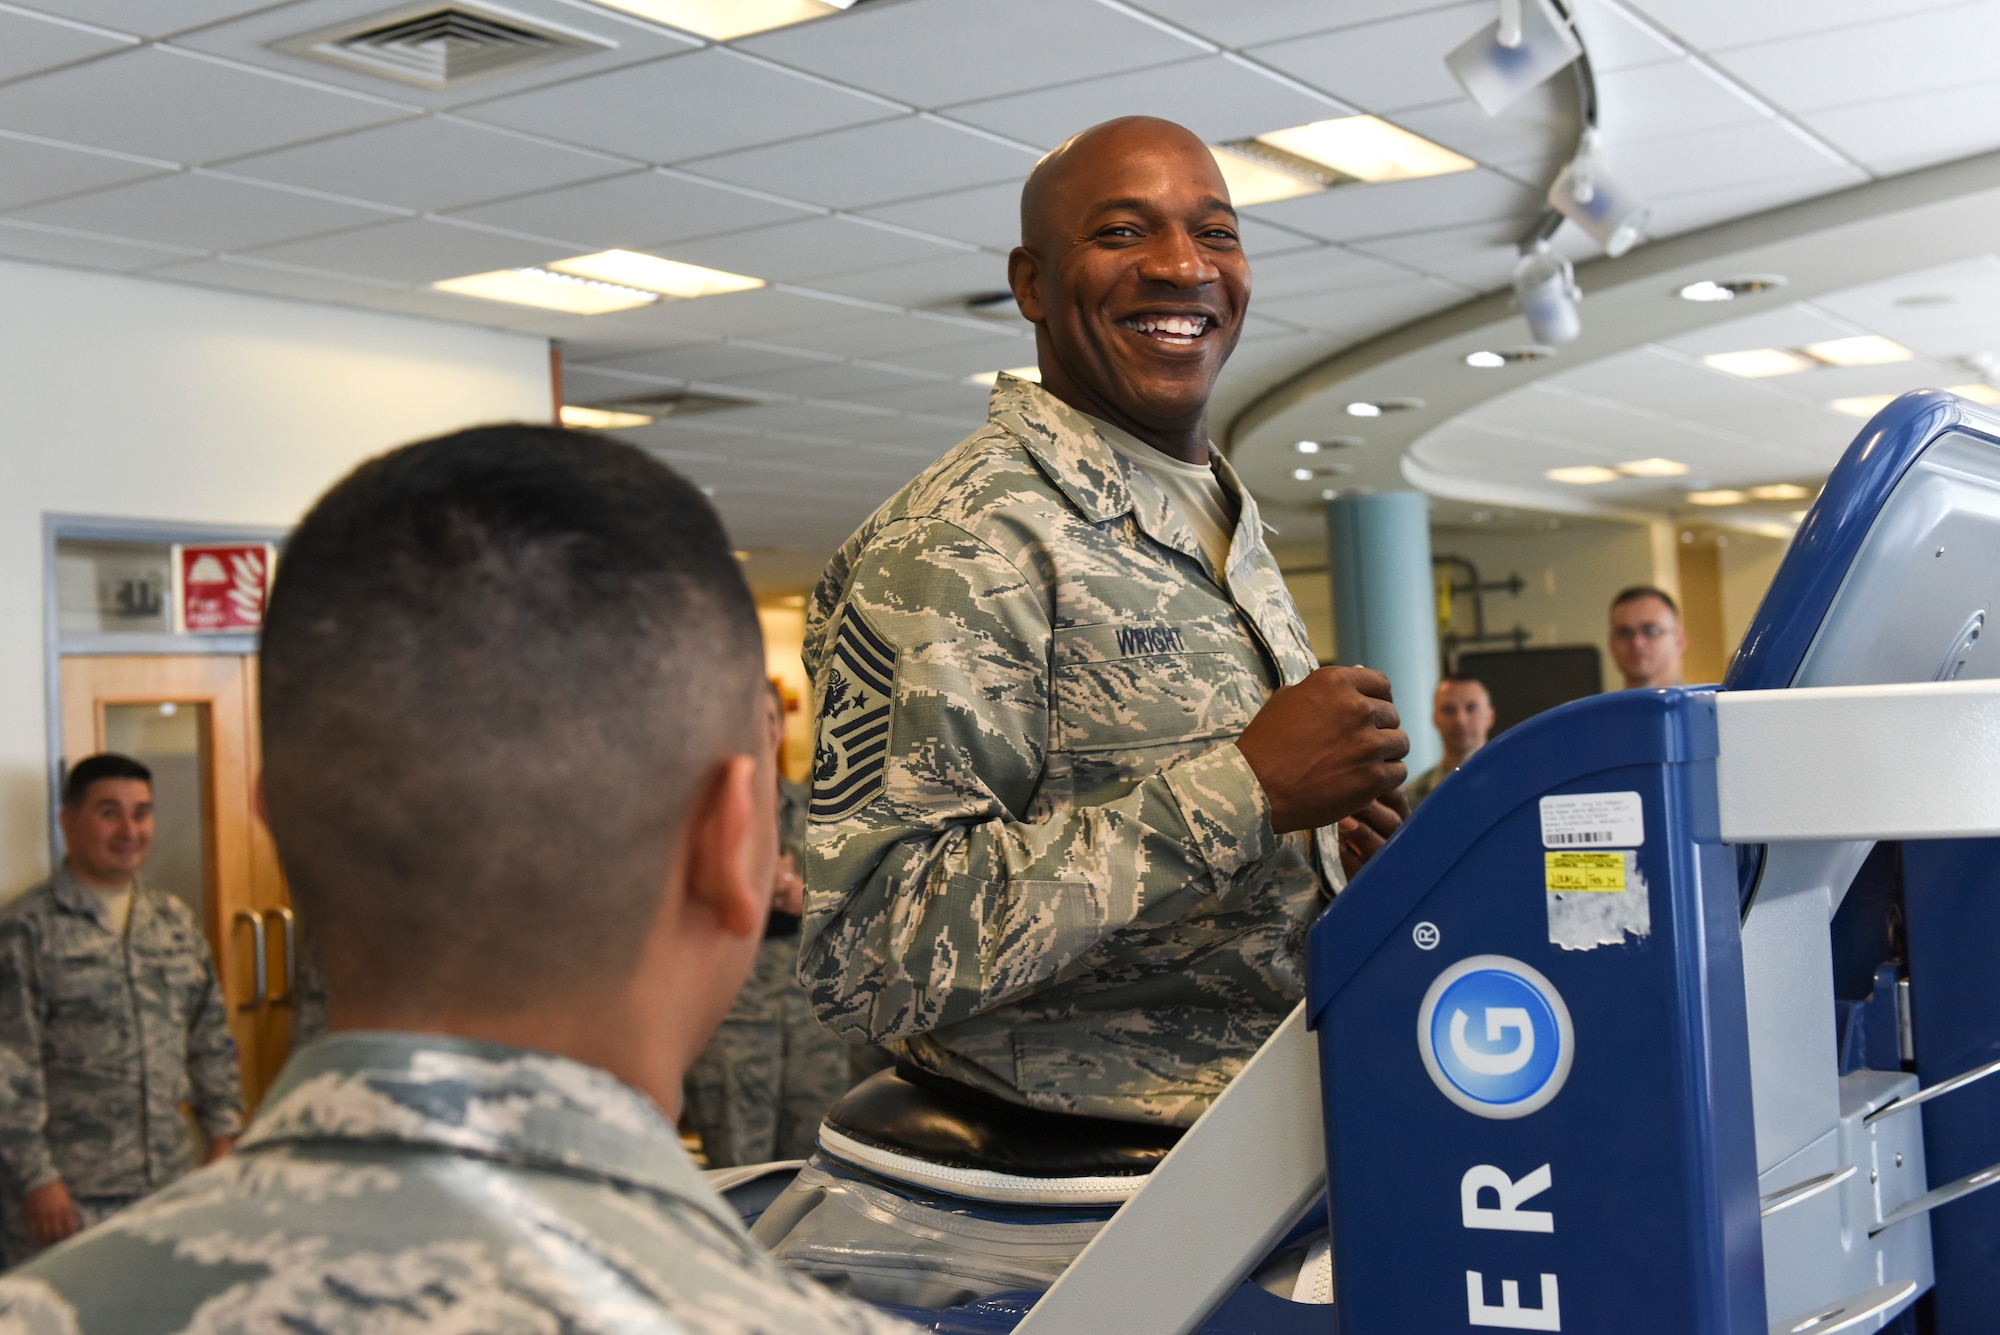 Chief Master Sgt. of the Air Force Kaleth O. Wright runs on a weightless treadmill at the 48th Medical Group during an immersion tour, Aug. 1, 2018 at Royal Air Force Lakenheath, England. The purpose of his visit was to meet the men and women of the 48th Fighter Wing and learn about how they take care of the mission. (U.S. Air Force photo/Airman 1st Class Christopher S. Sparks)